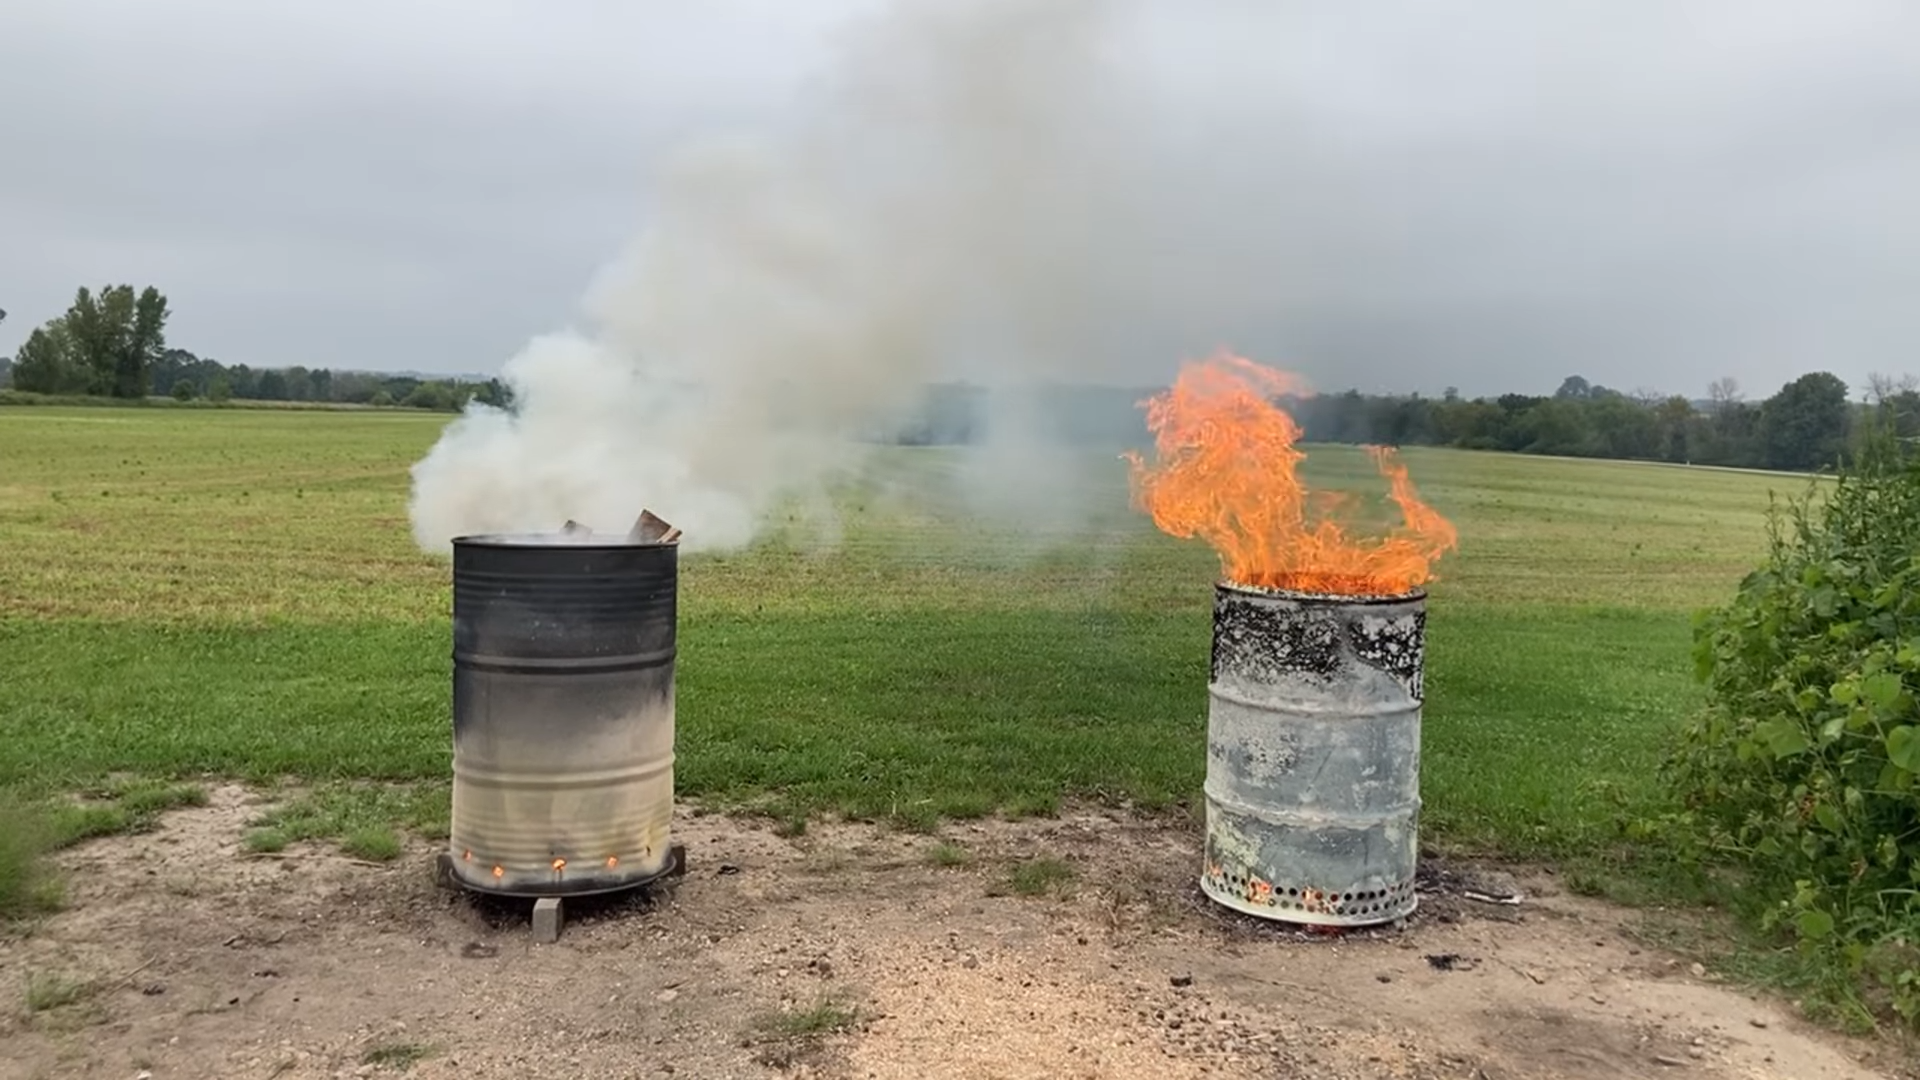 Burn Barrels: Types, Uses, Features and Benefits